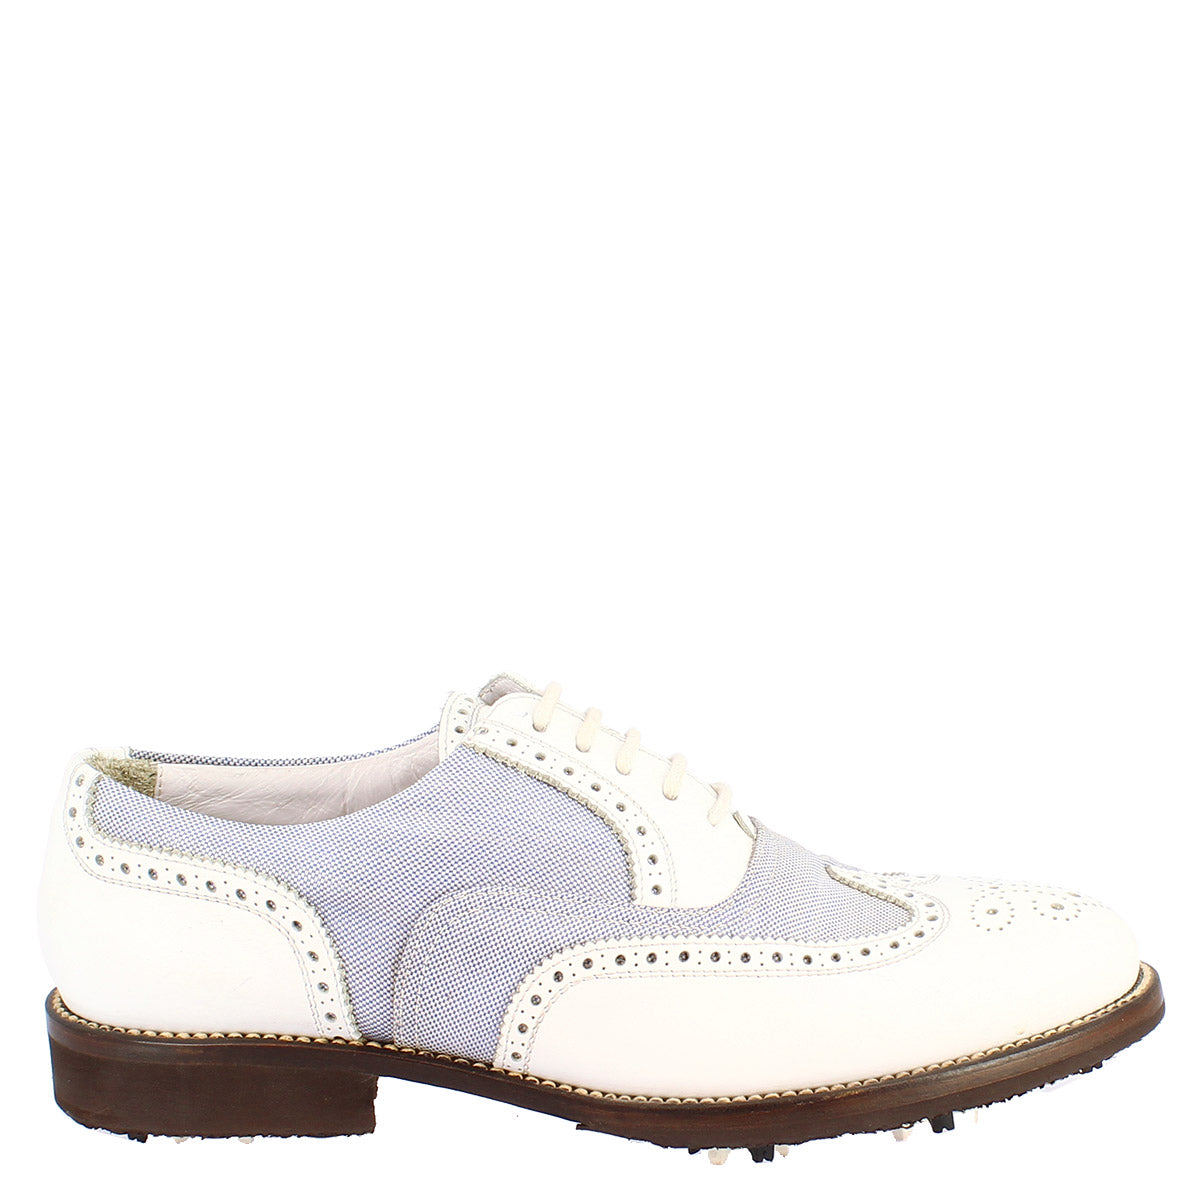 Handmade women's summer golf shoes in white leather and fabric